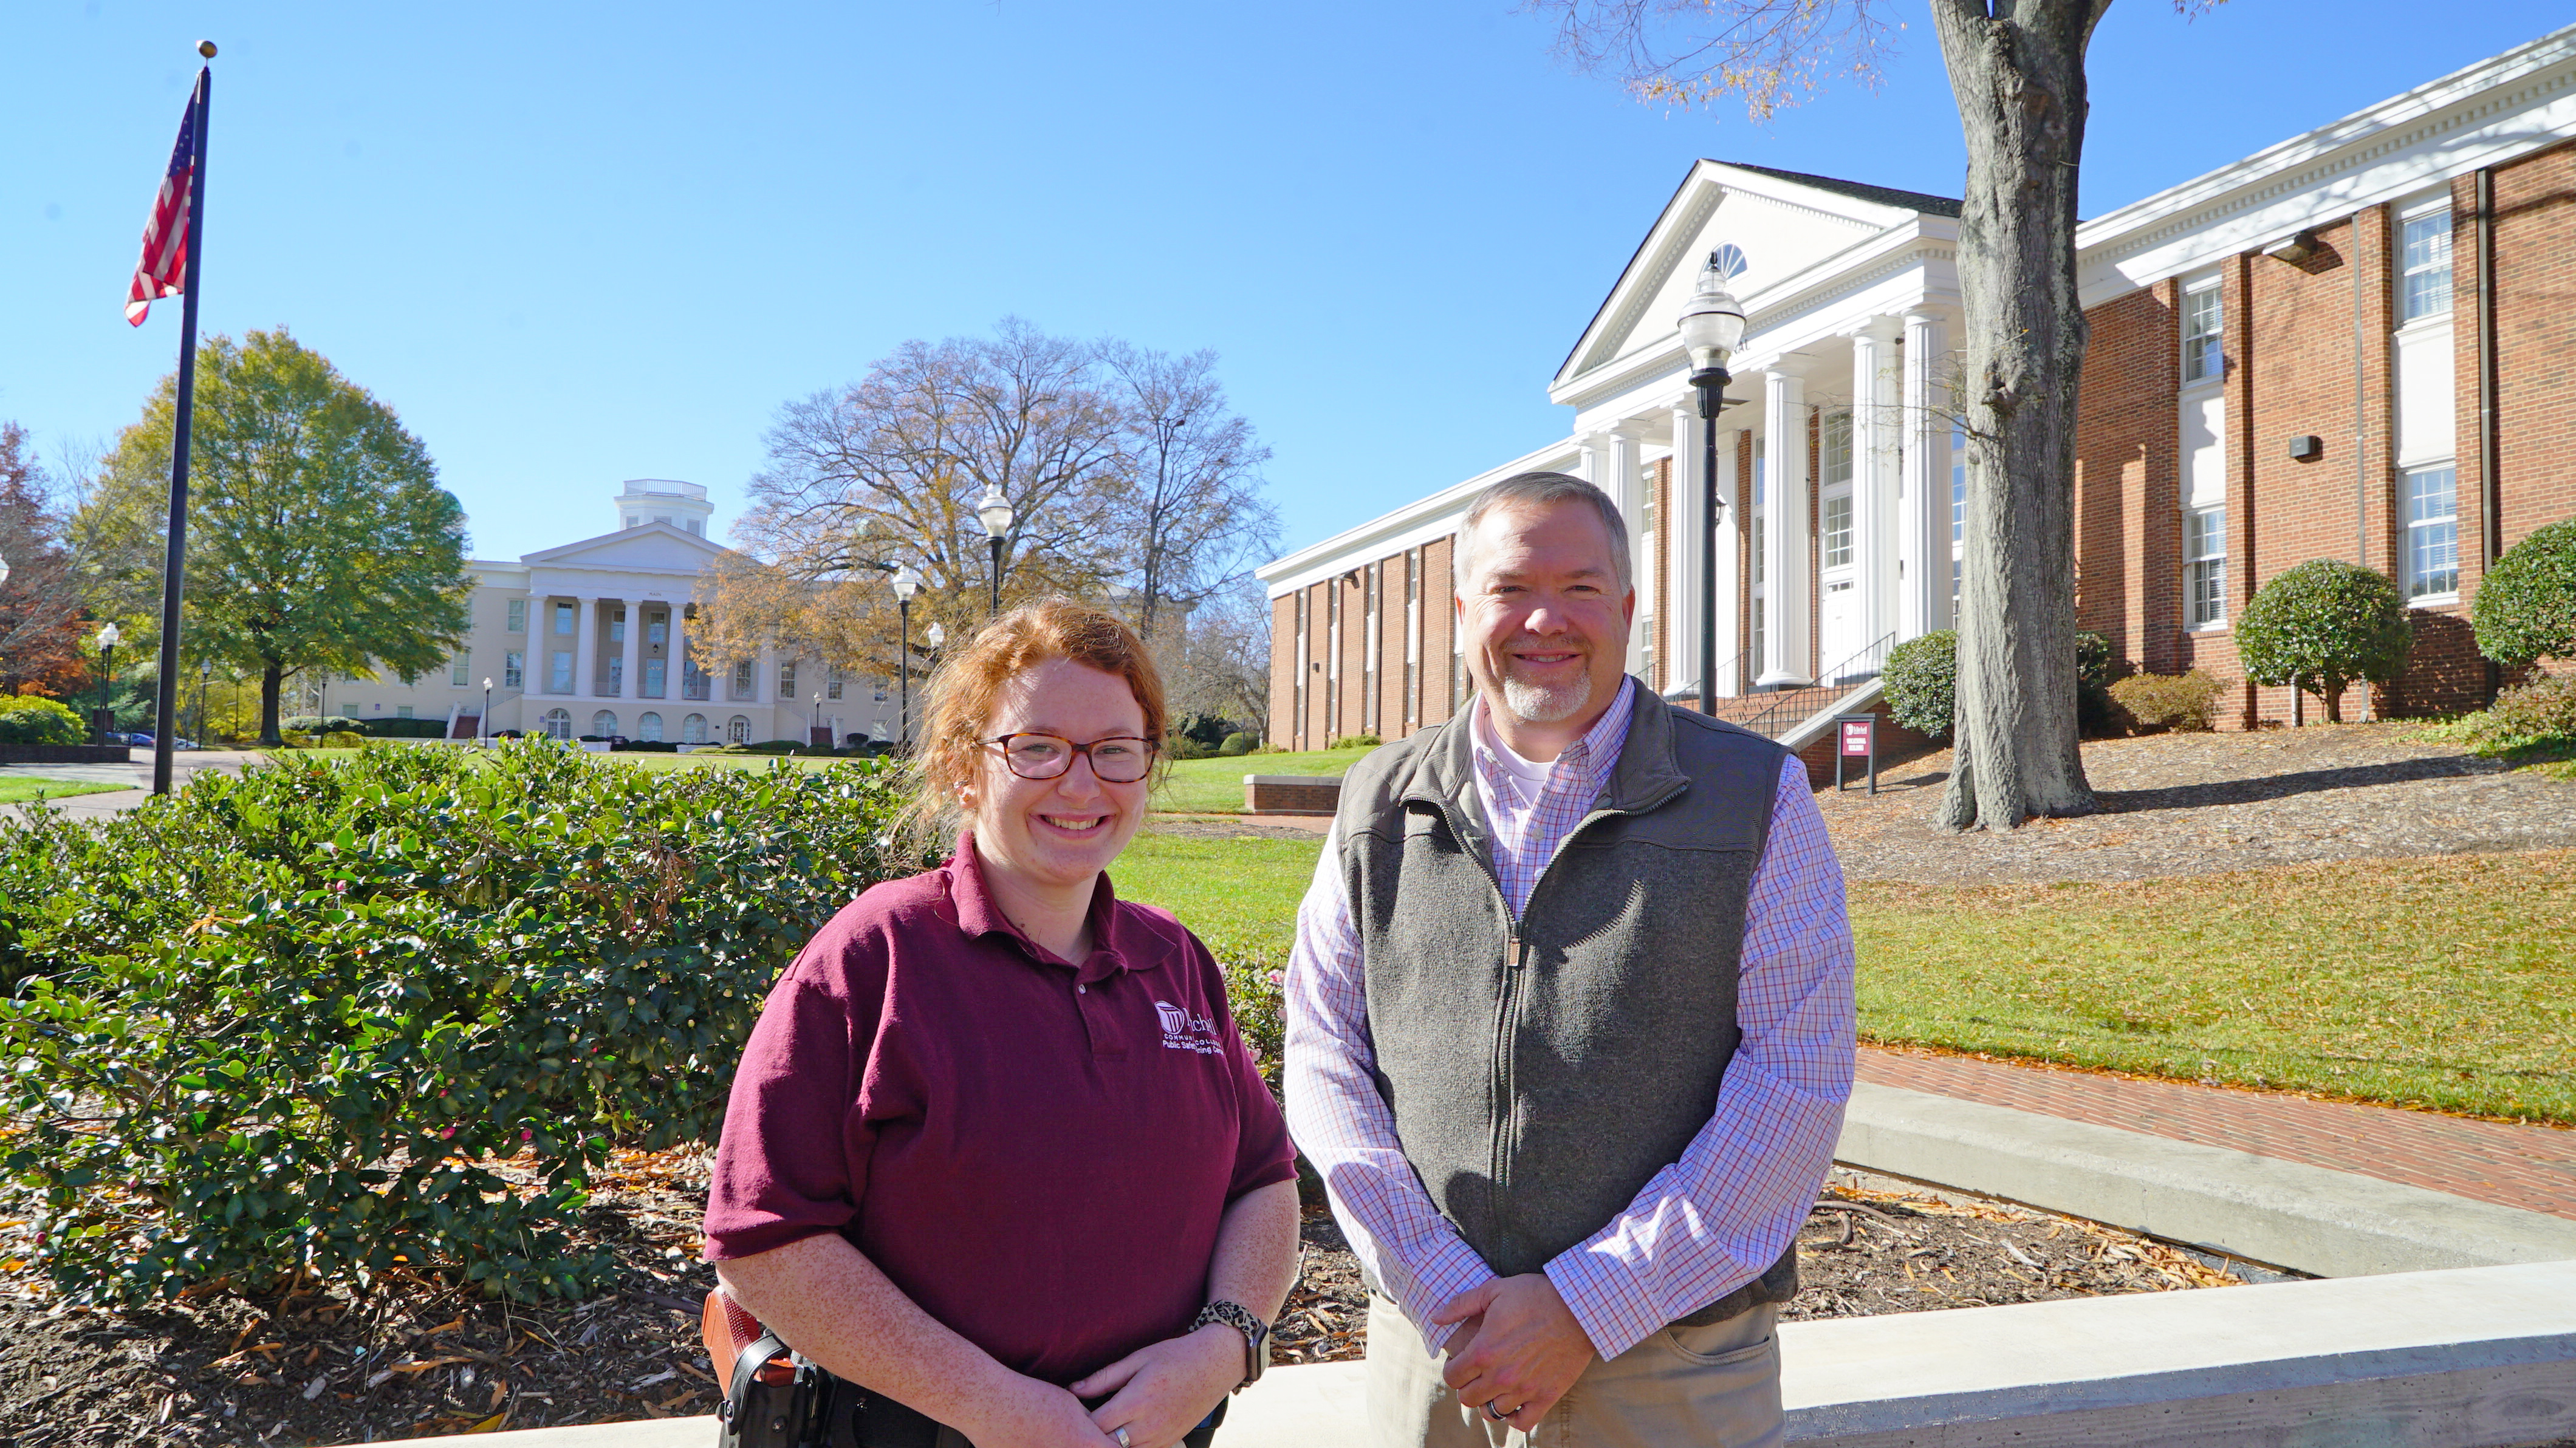 BLET student and scholarship recipient Whiteny Craven and Sheriff Daren Campbell on Mitchell's historic Statesville Campus.